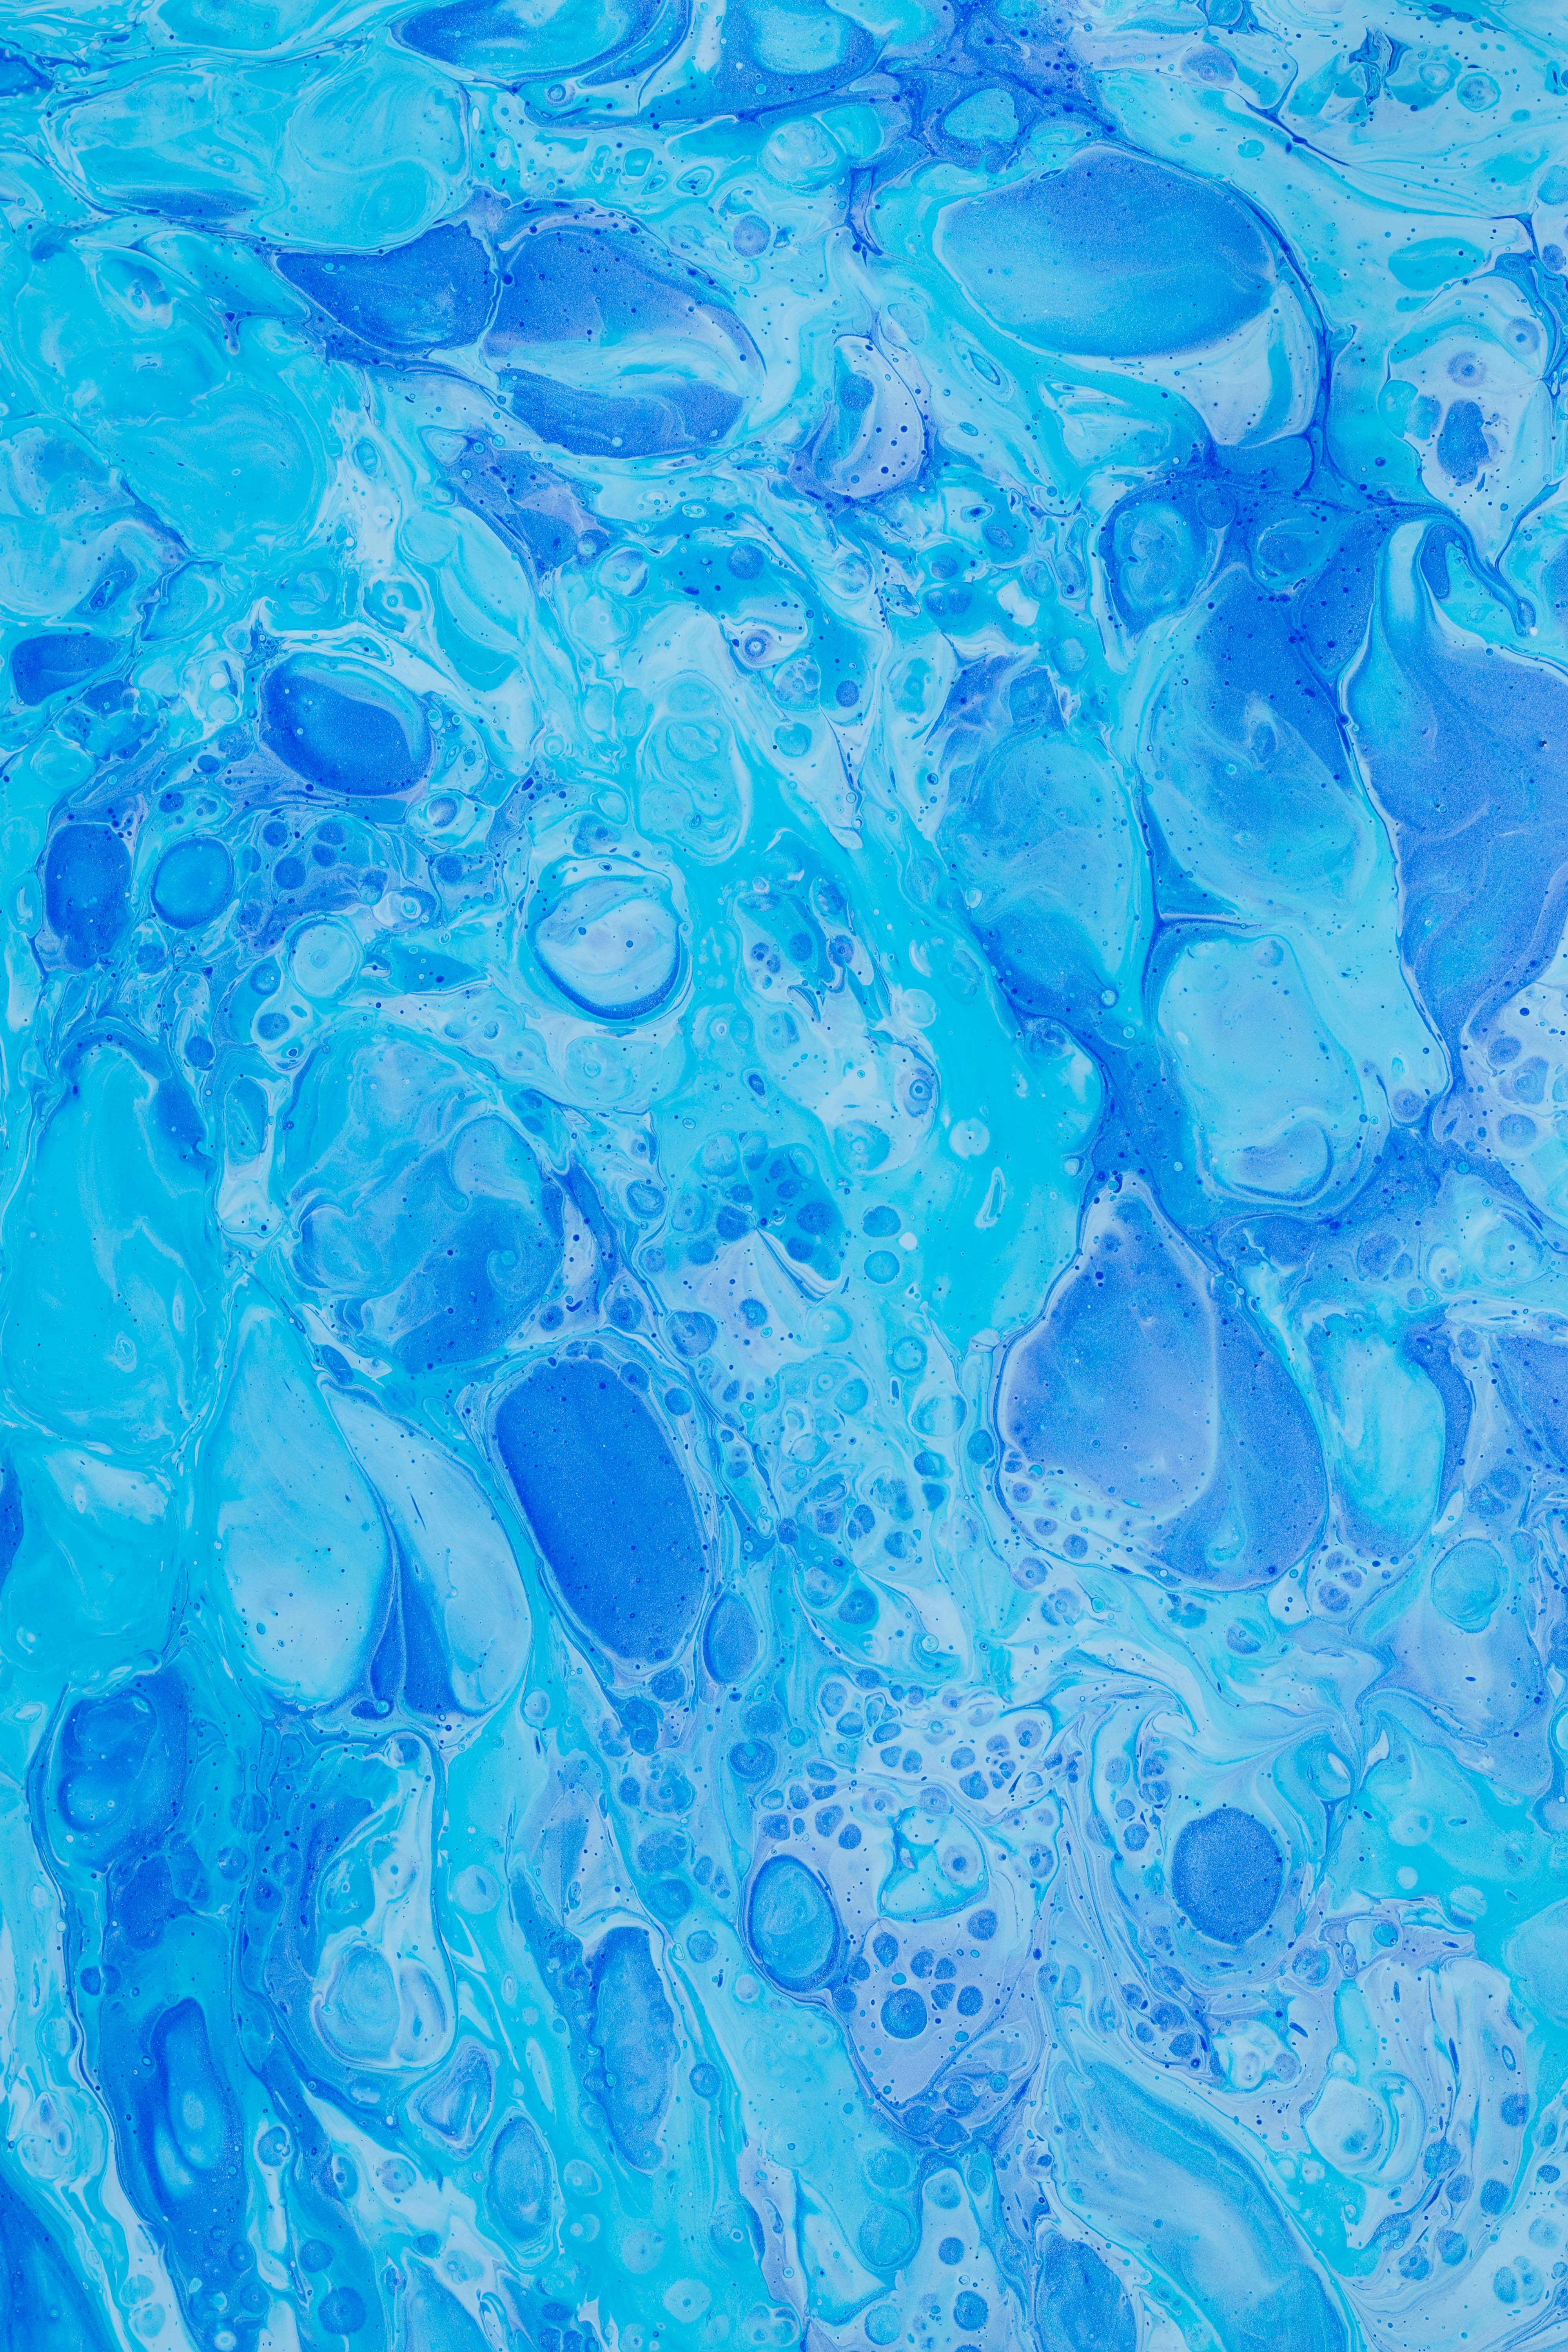 watercolor, blue, abstract, paint, stains, spots lock screen backgrounds